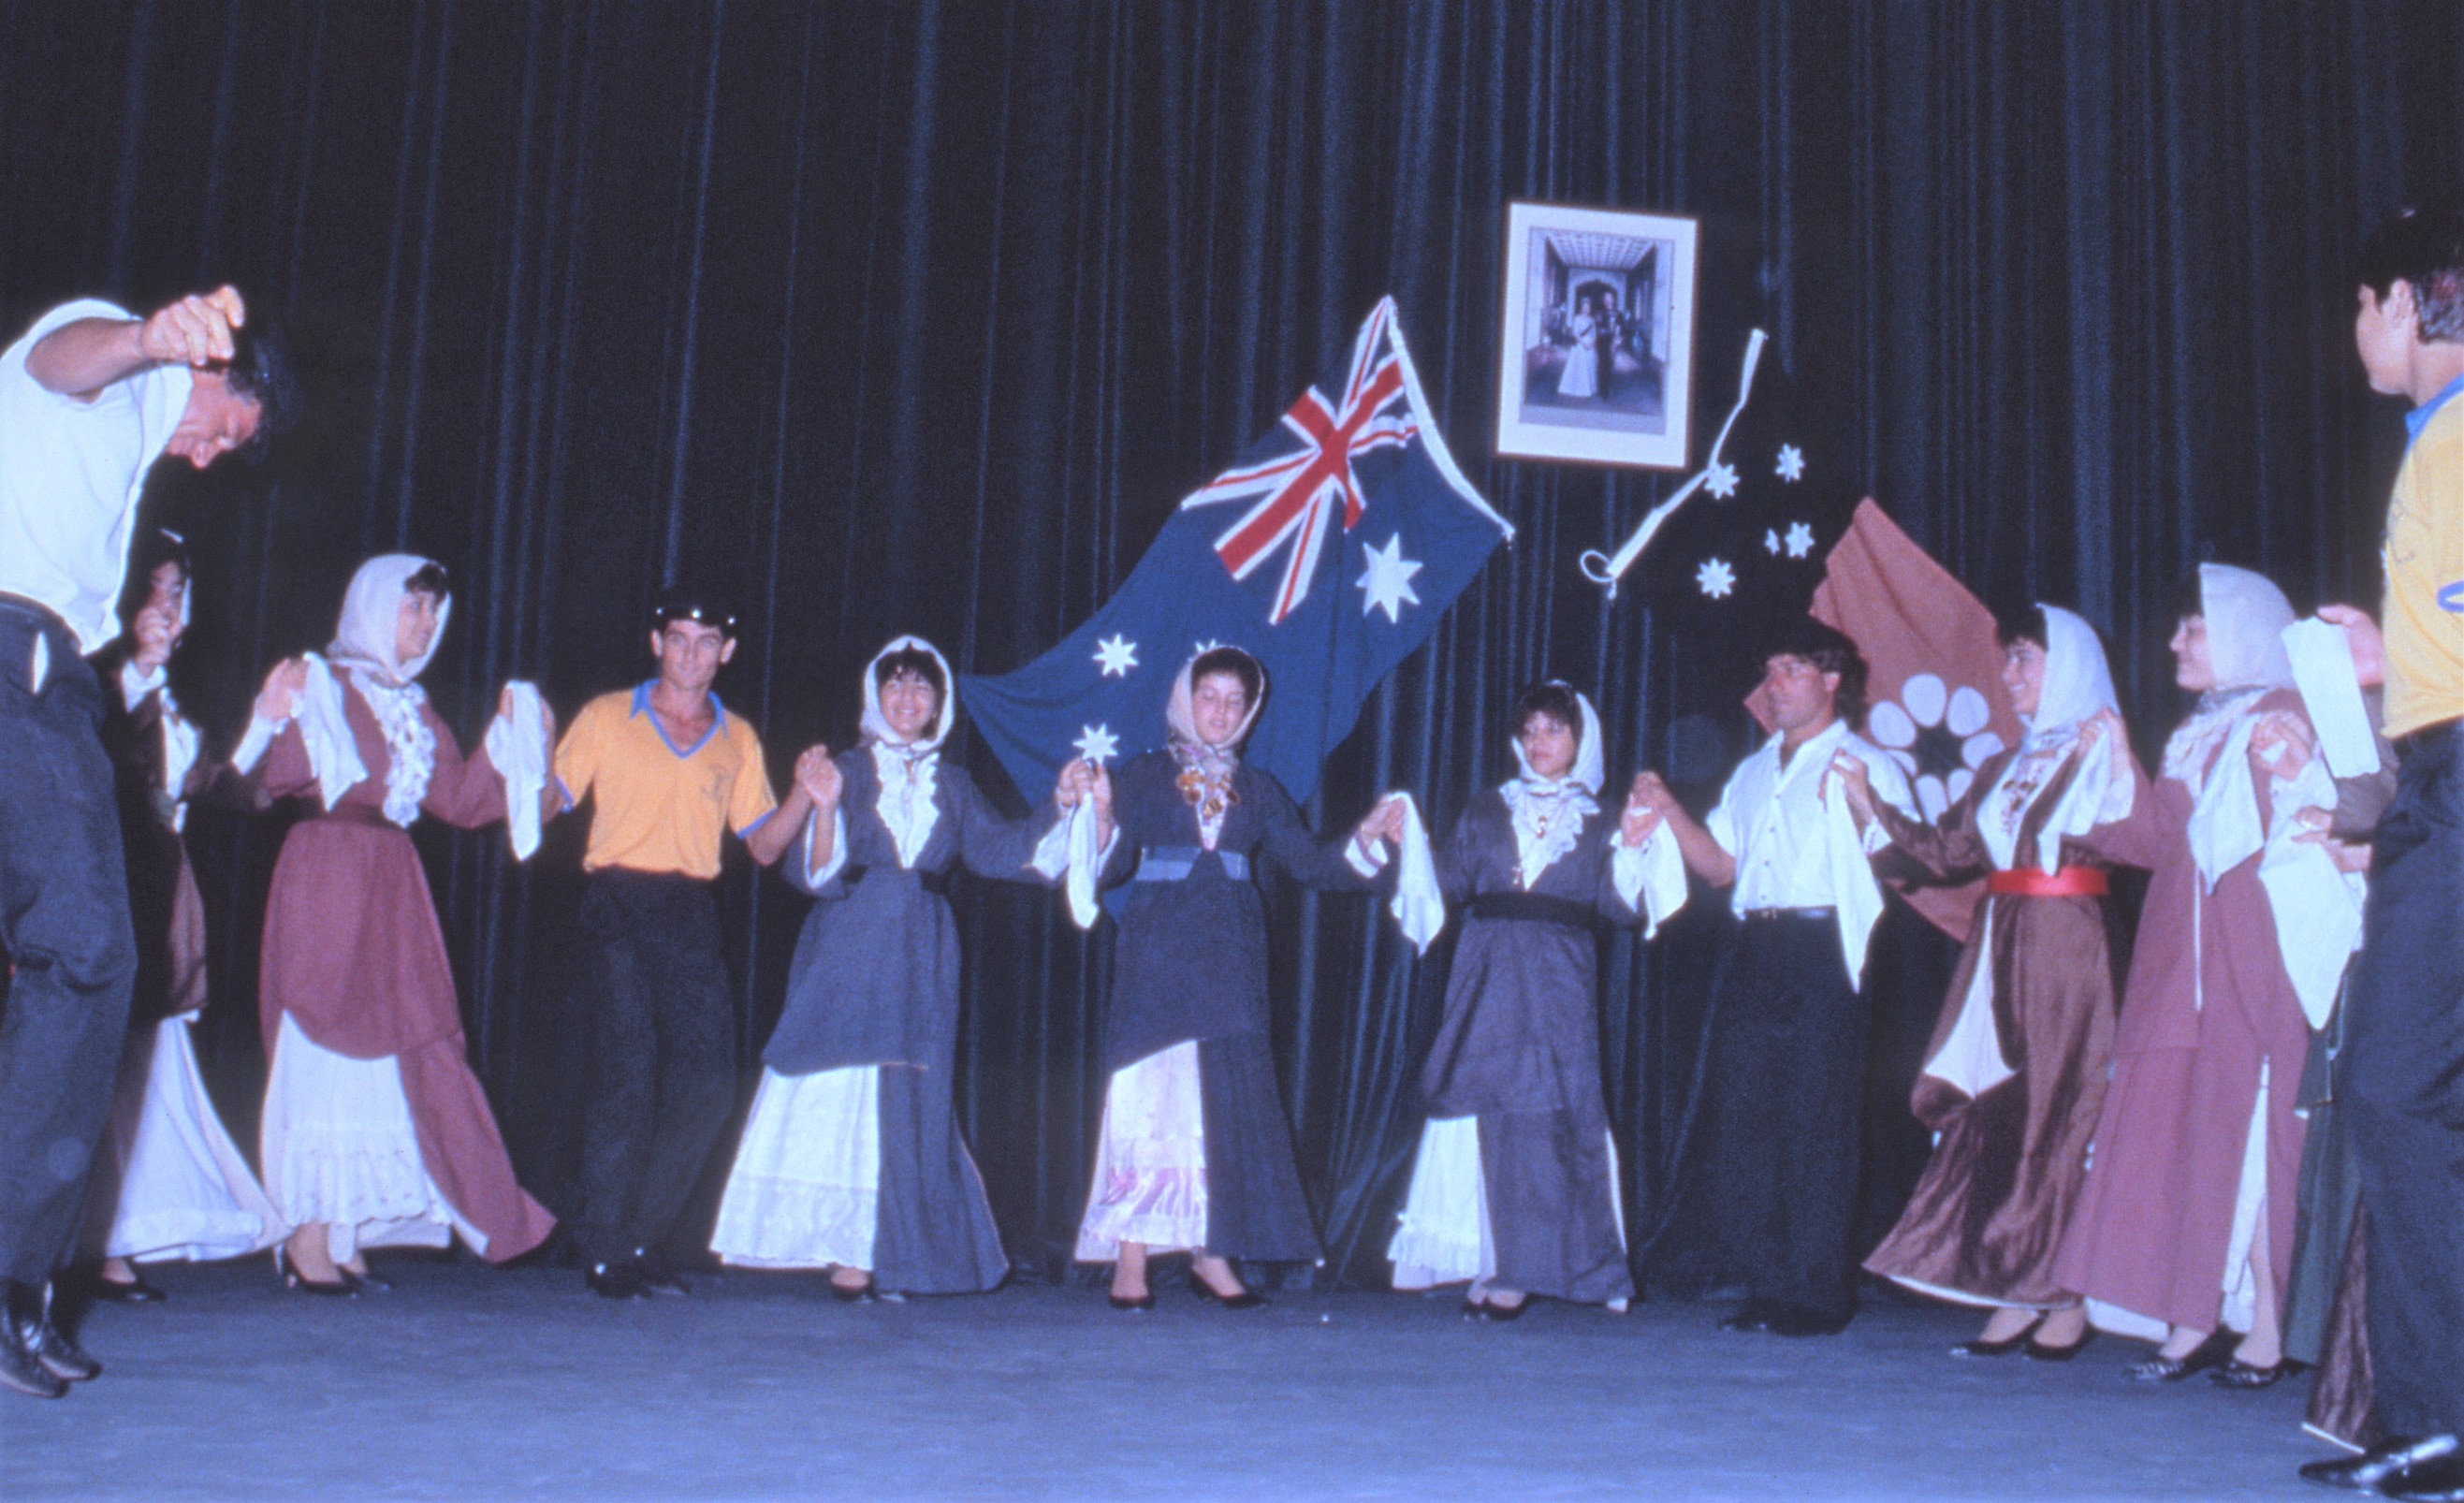 A row of eleven people in traditional Greek dress hold hands and dance in front of the Australian and Northern Territory flags. 